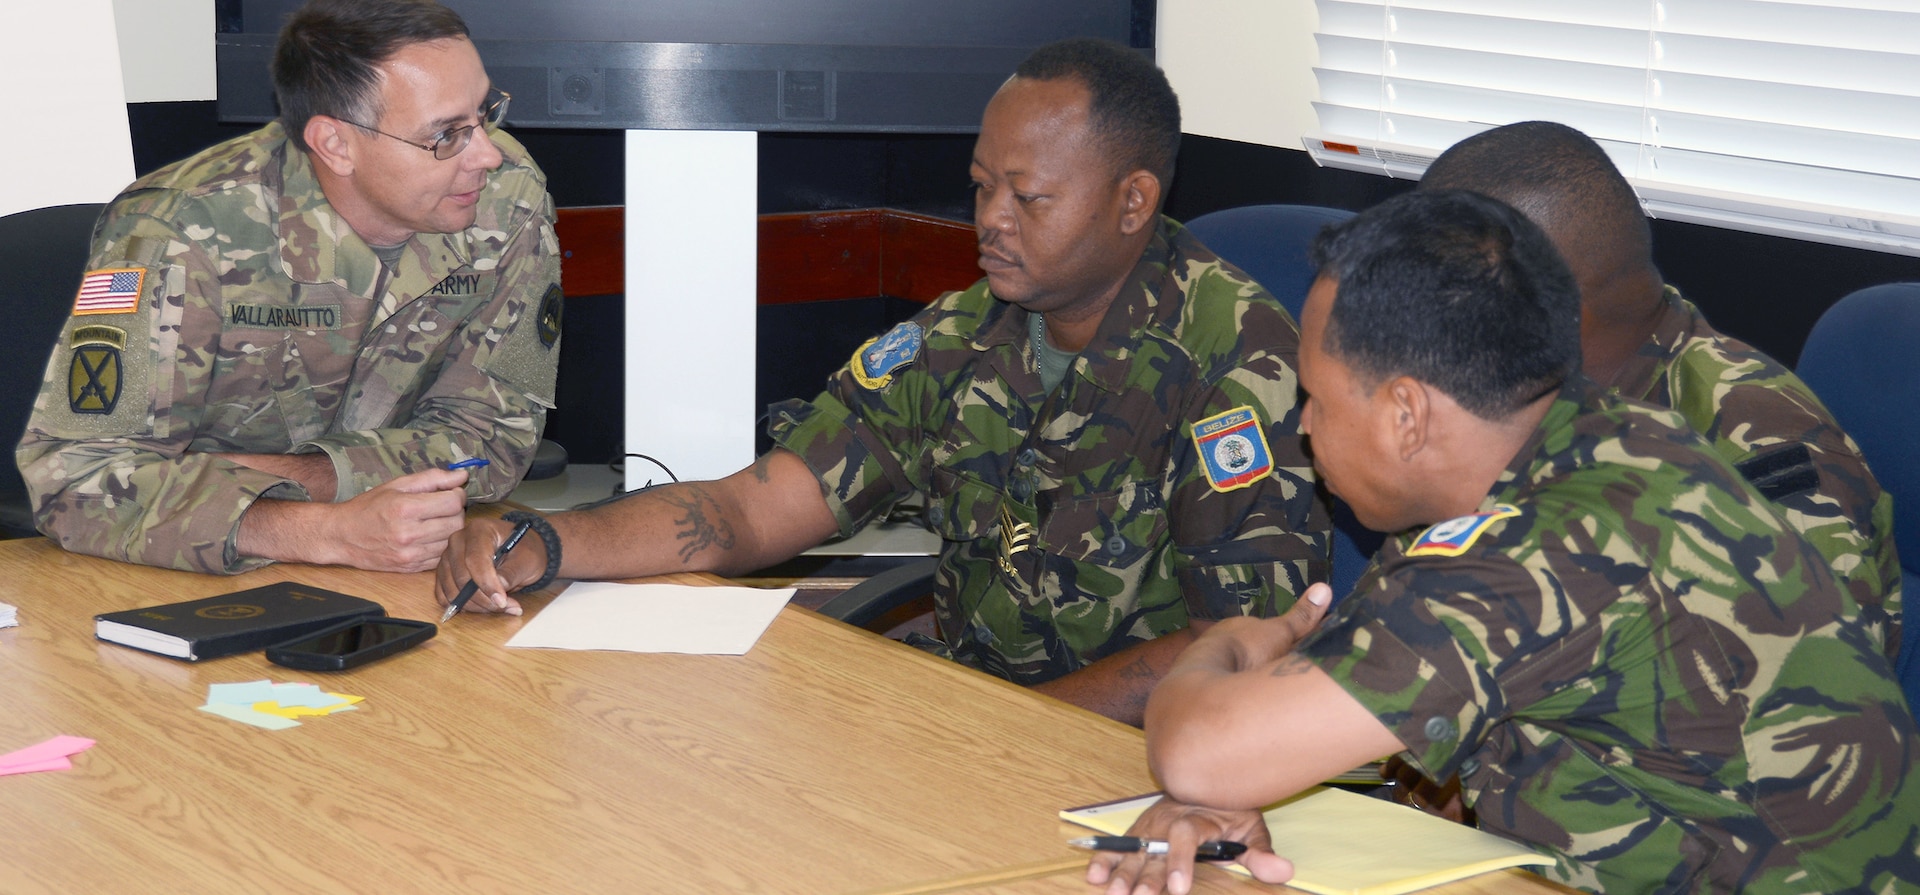 (From left) Capt. James Hoover, U.S. Army Louisiana National Guard; Cpl. Obedio Keh and Capt. Darius Ramos, Belize Defense Force, participate in a table top exercise during an Energy and Water Conservation Policy Subject Matter Expert Exchange in Belize City May 8.